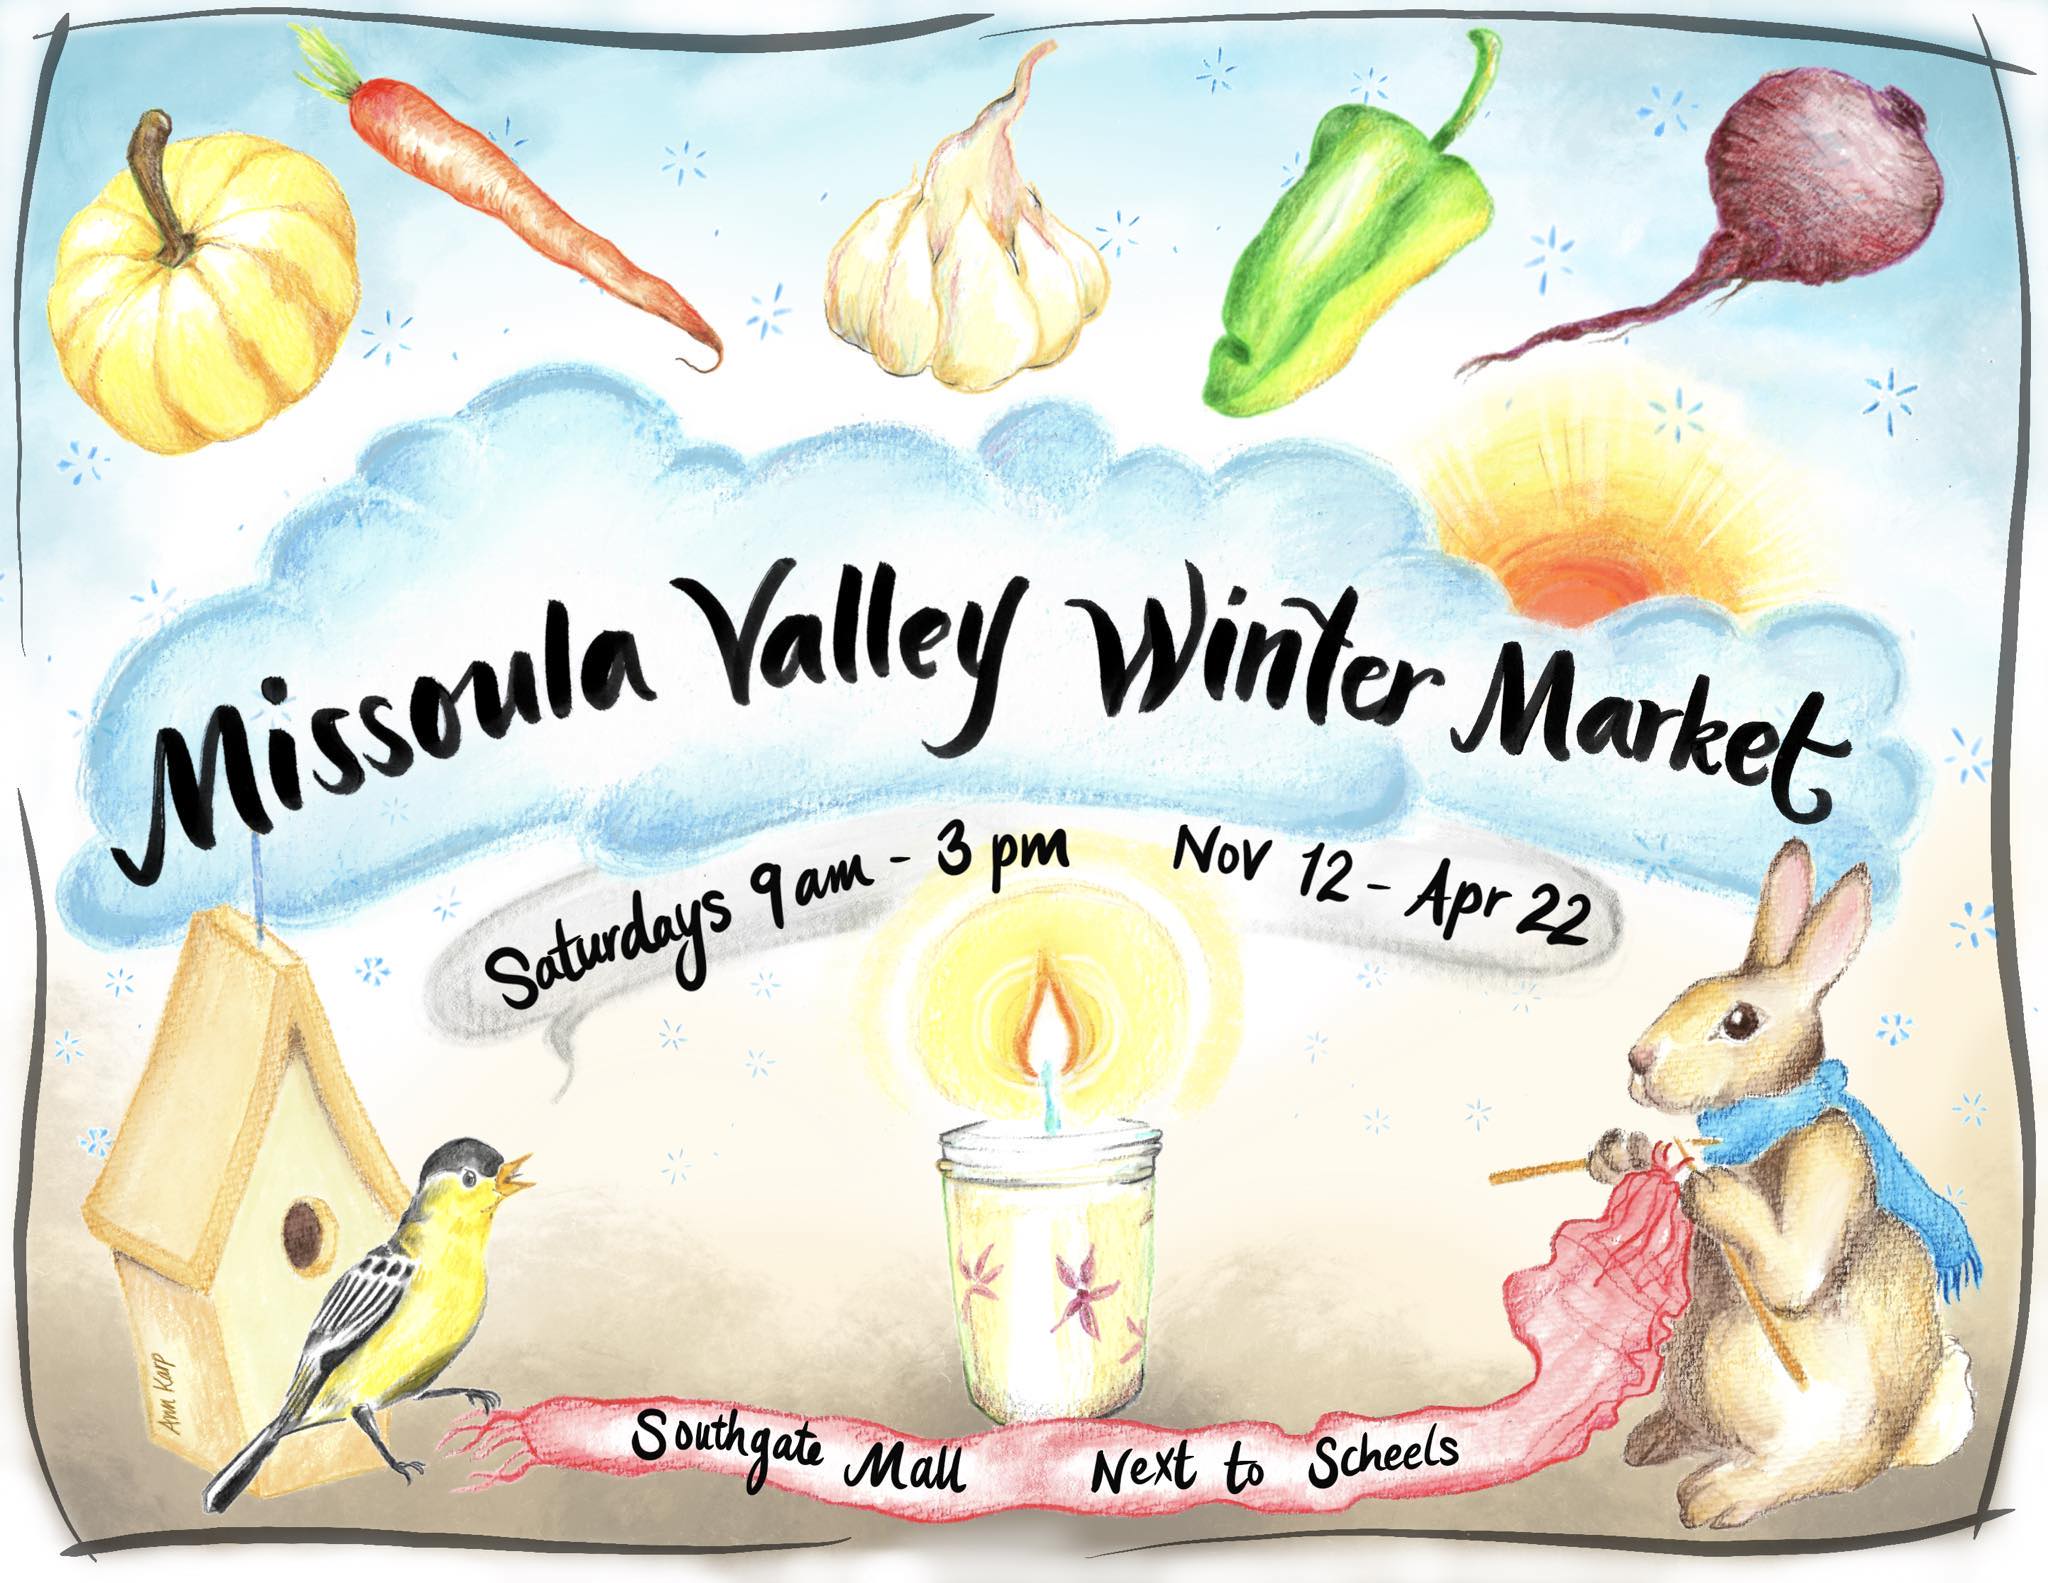 Missoula Valley Winter Market from 9:00 am to 3:00 pm Saturdays at Southgate Mall